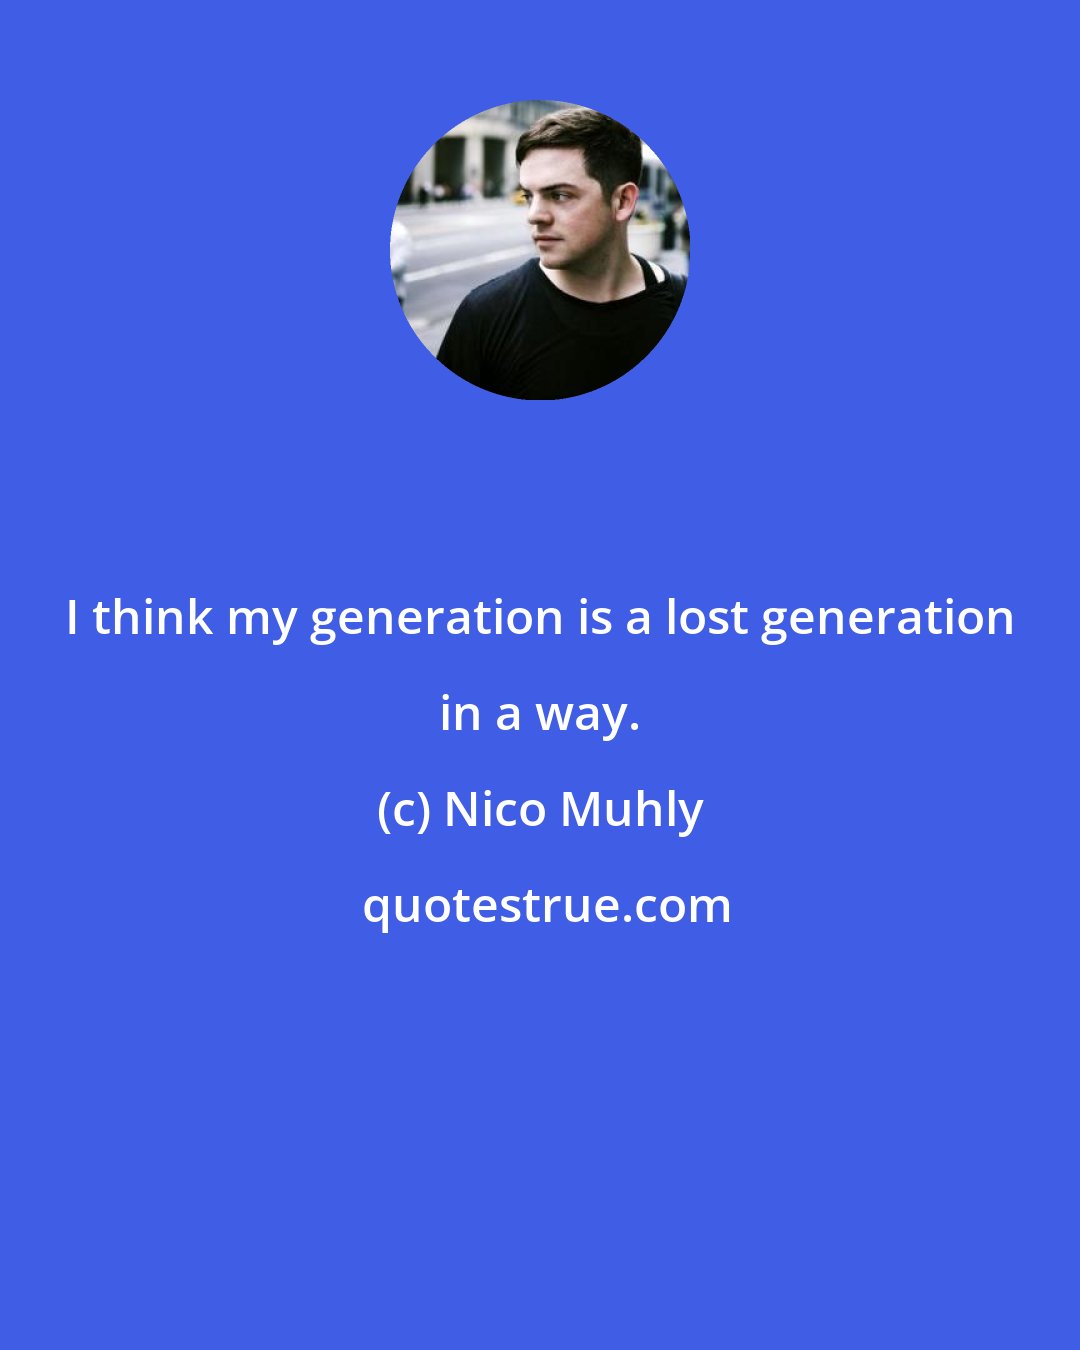 Nico Muhly: I think my generation is a lost generation in a way.